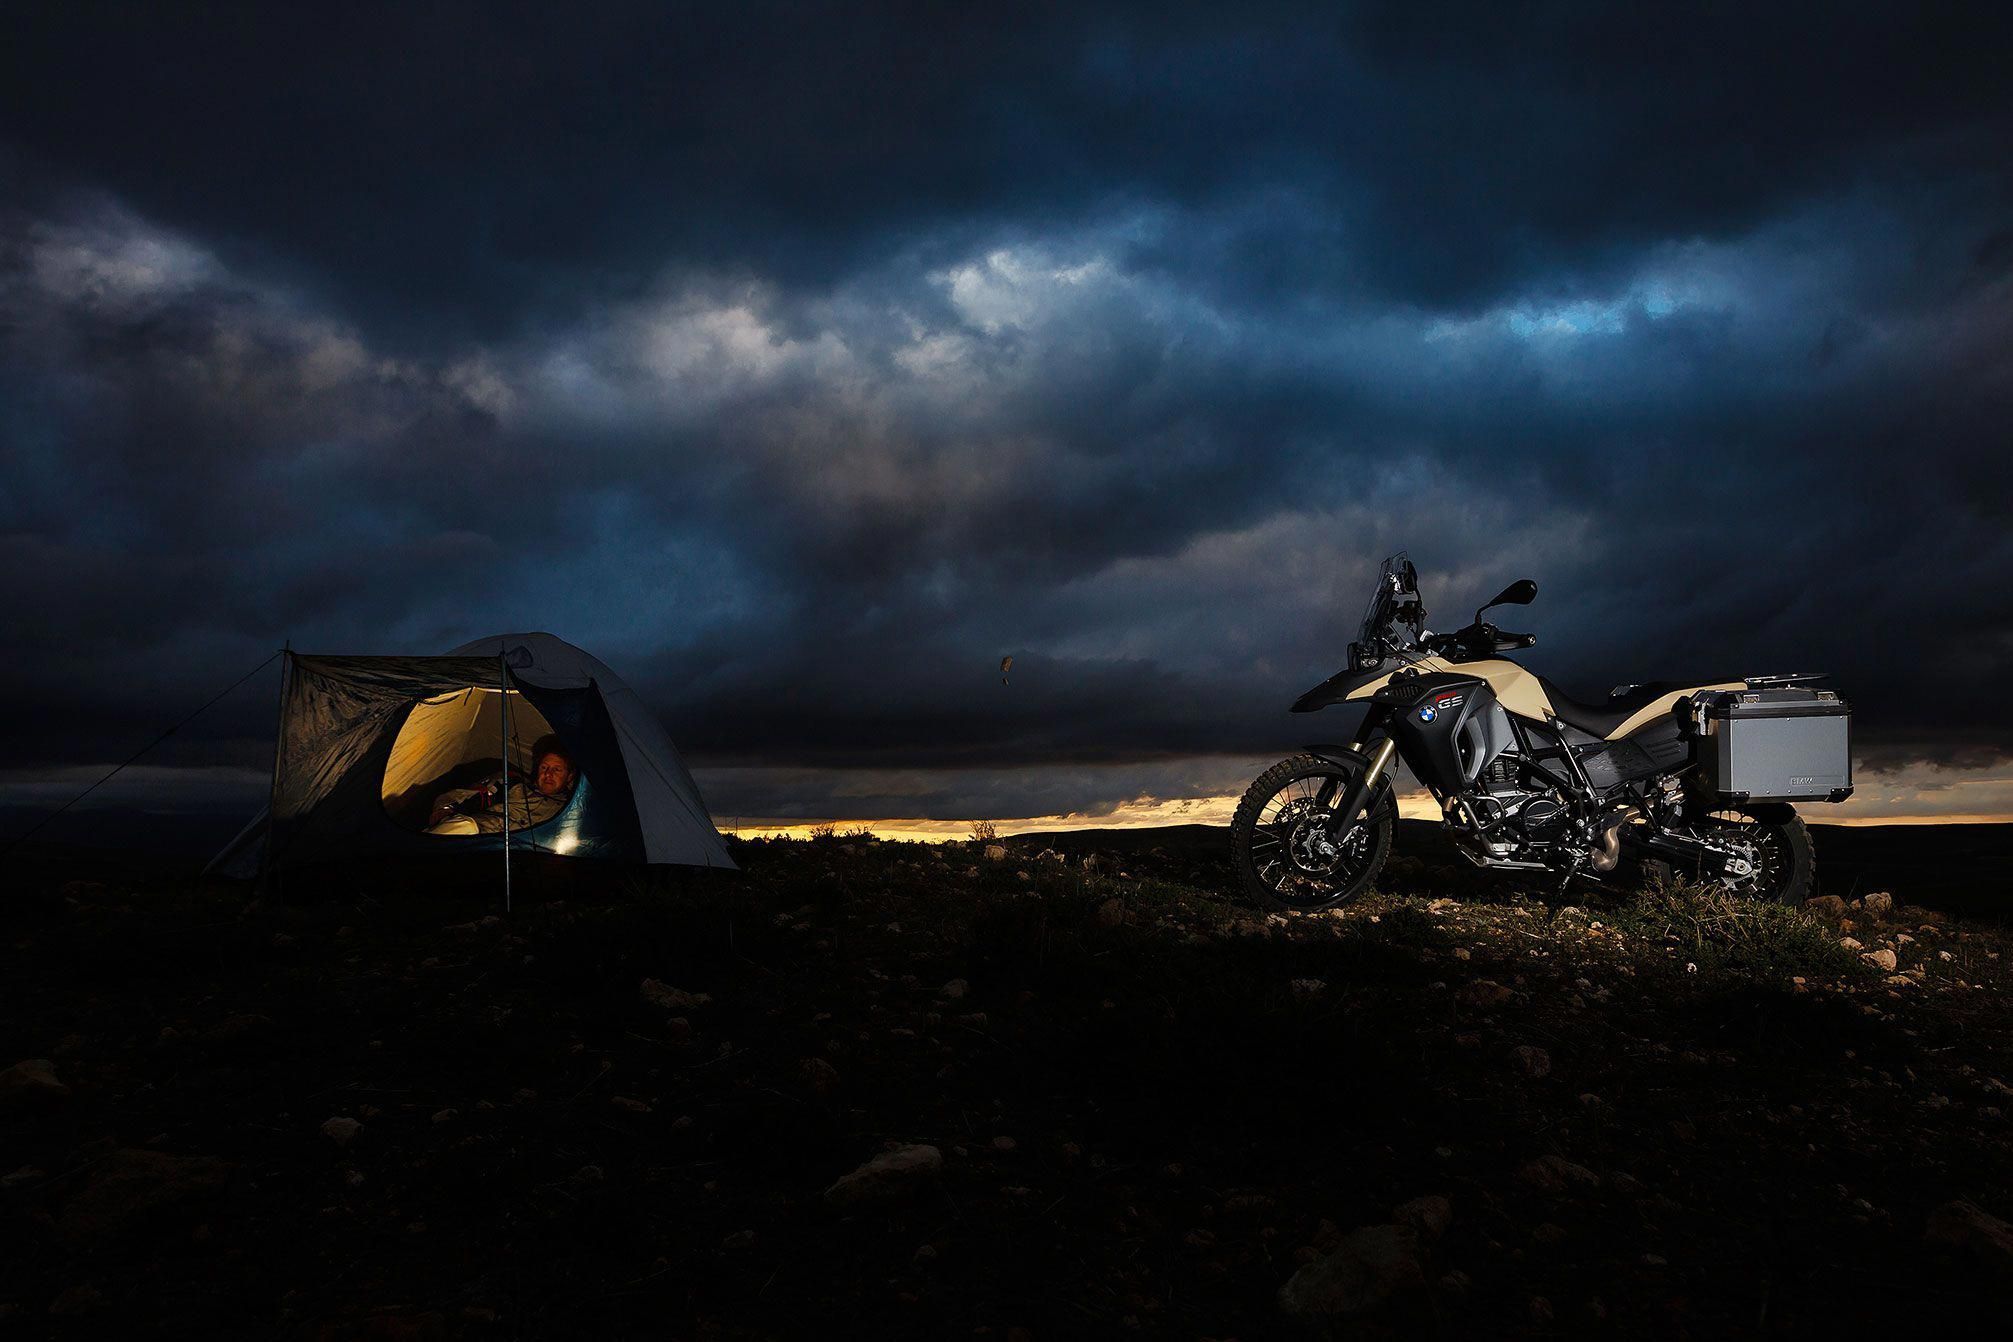 Read more about motorcycle camping long distance Please click here to learn more #motorcyc. Adventure bike riding, Motorcycle camping gear, Adventure motorcycling